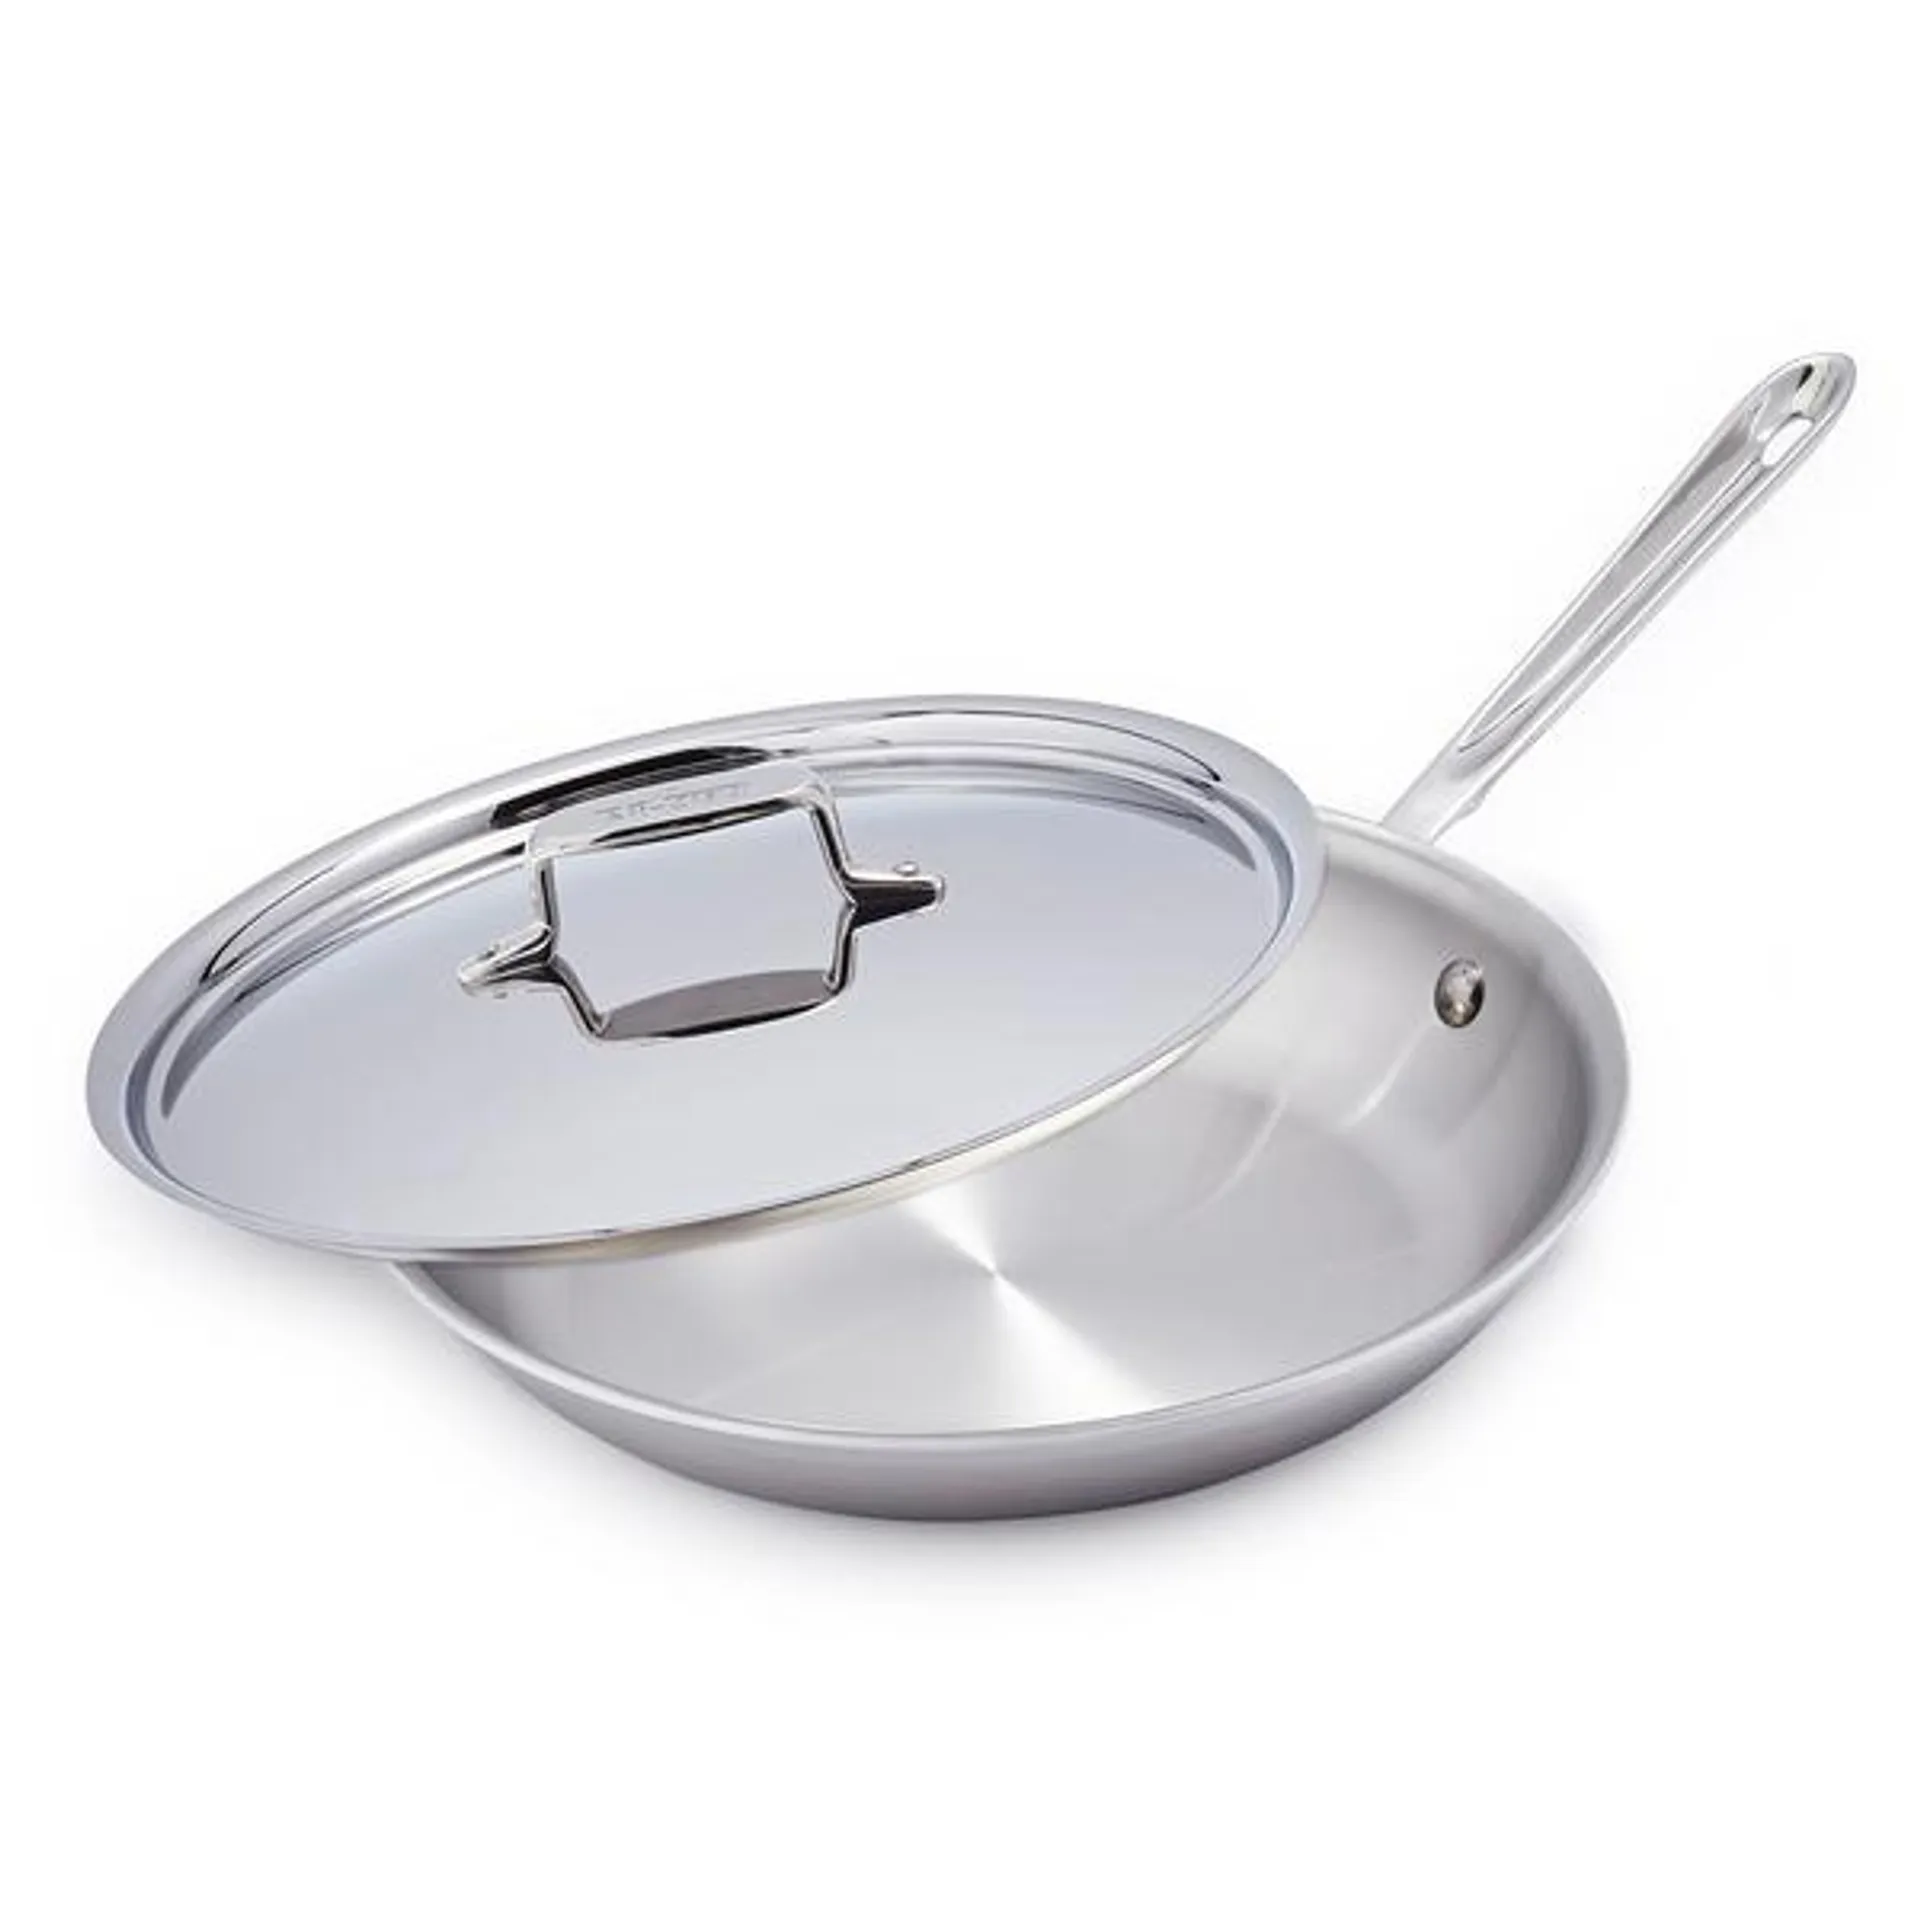 All-Clad d5 Brushed Stainless Steel Skillet with Lid, 12"